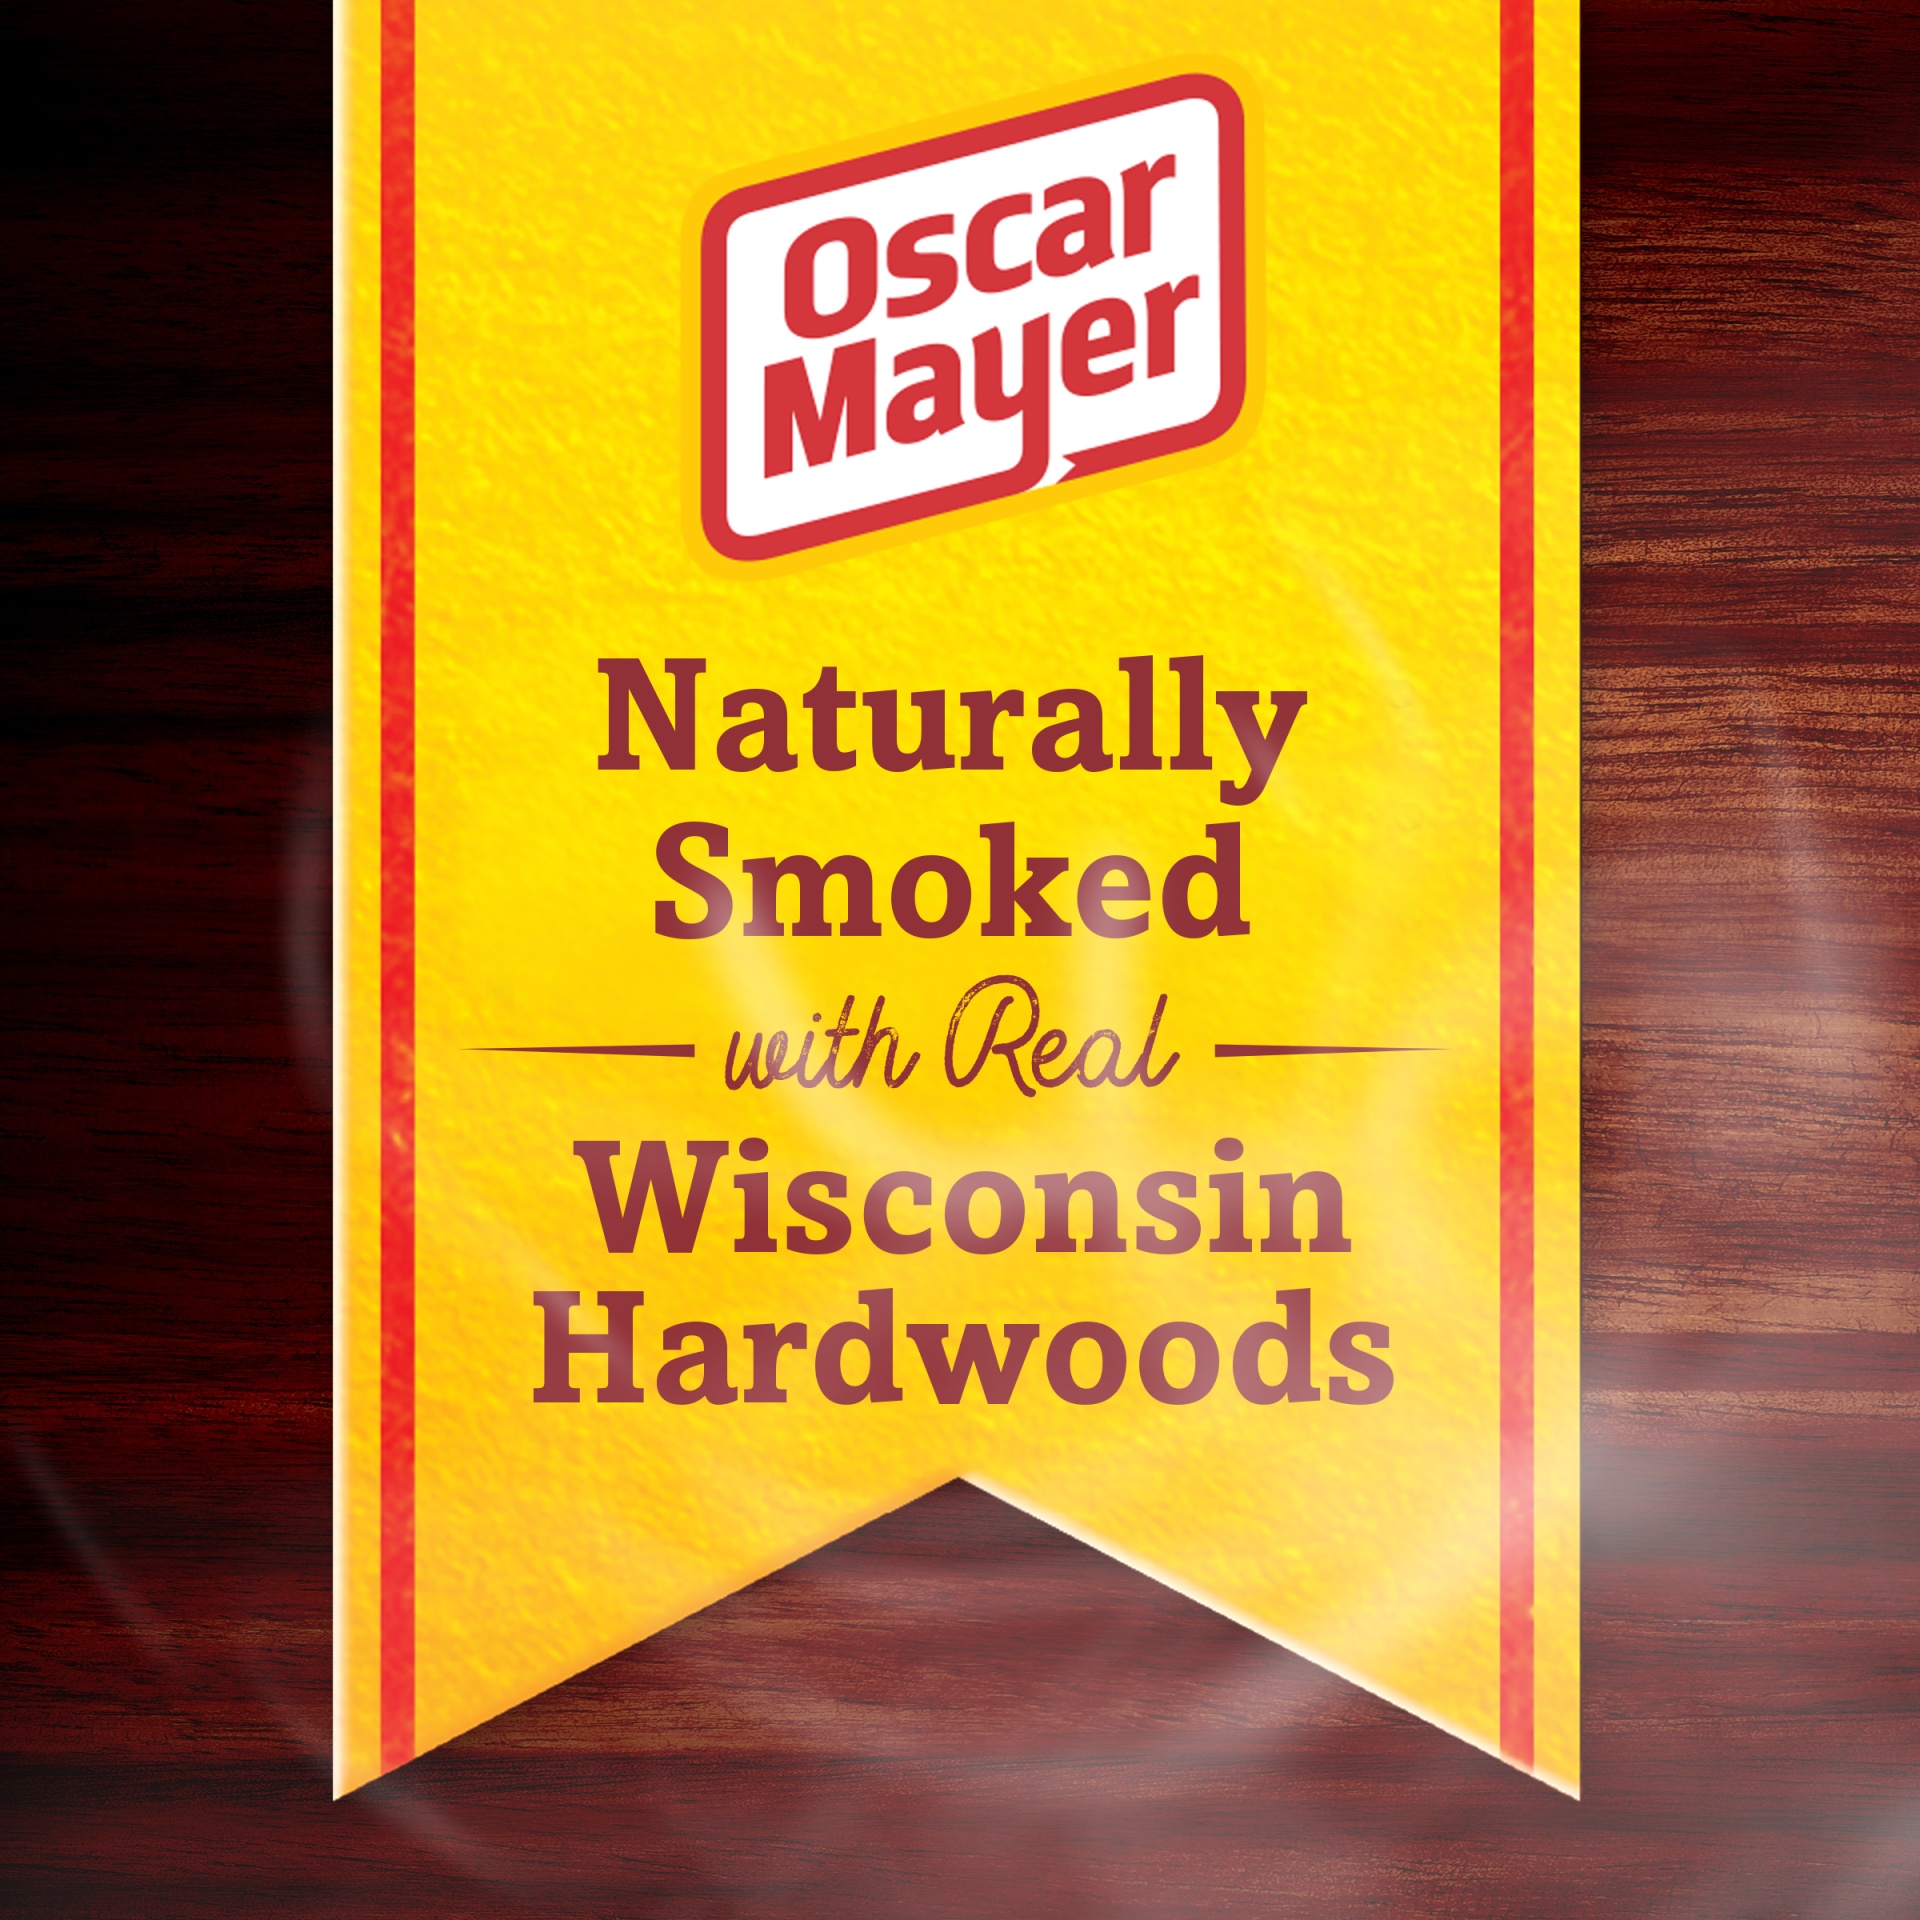 slide 4 of 12, Oscar Mayer Naturally Hardwood Smoked Thick Cut Bacon Pack, 11-13 slices, 16 oz